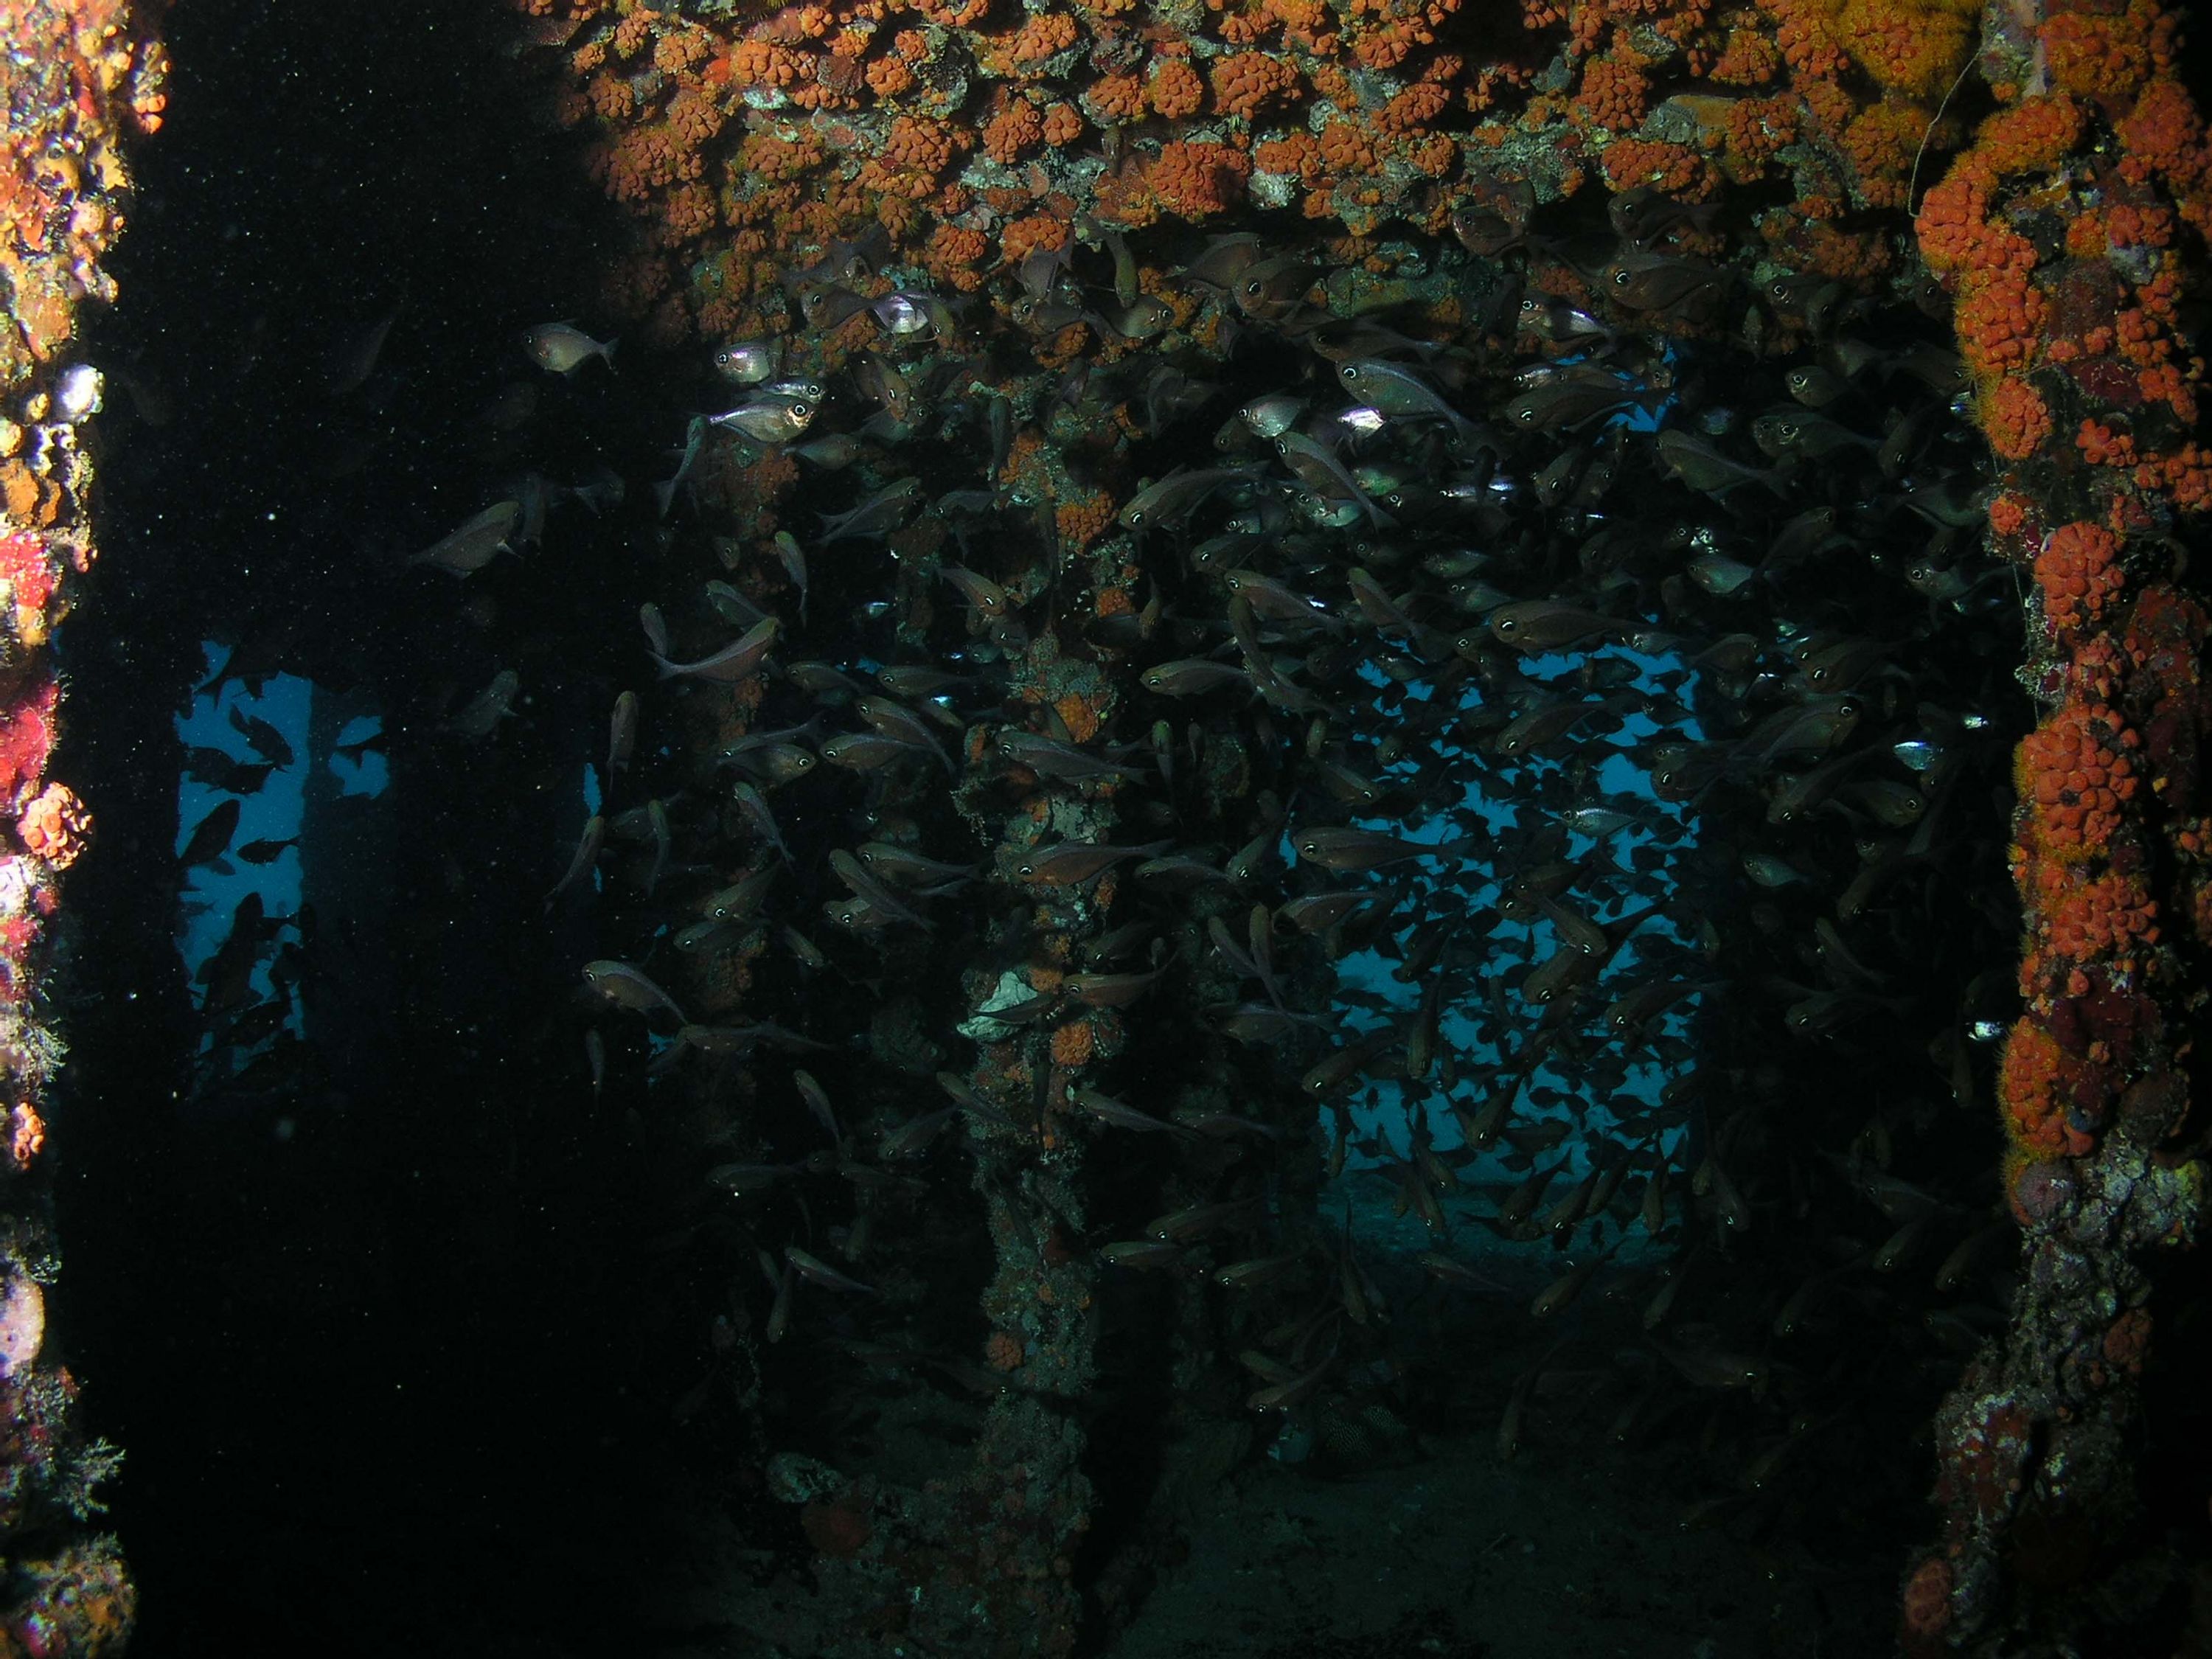 Glassfish in Wreck